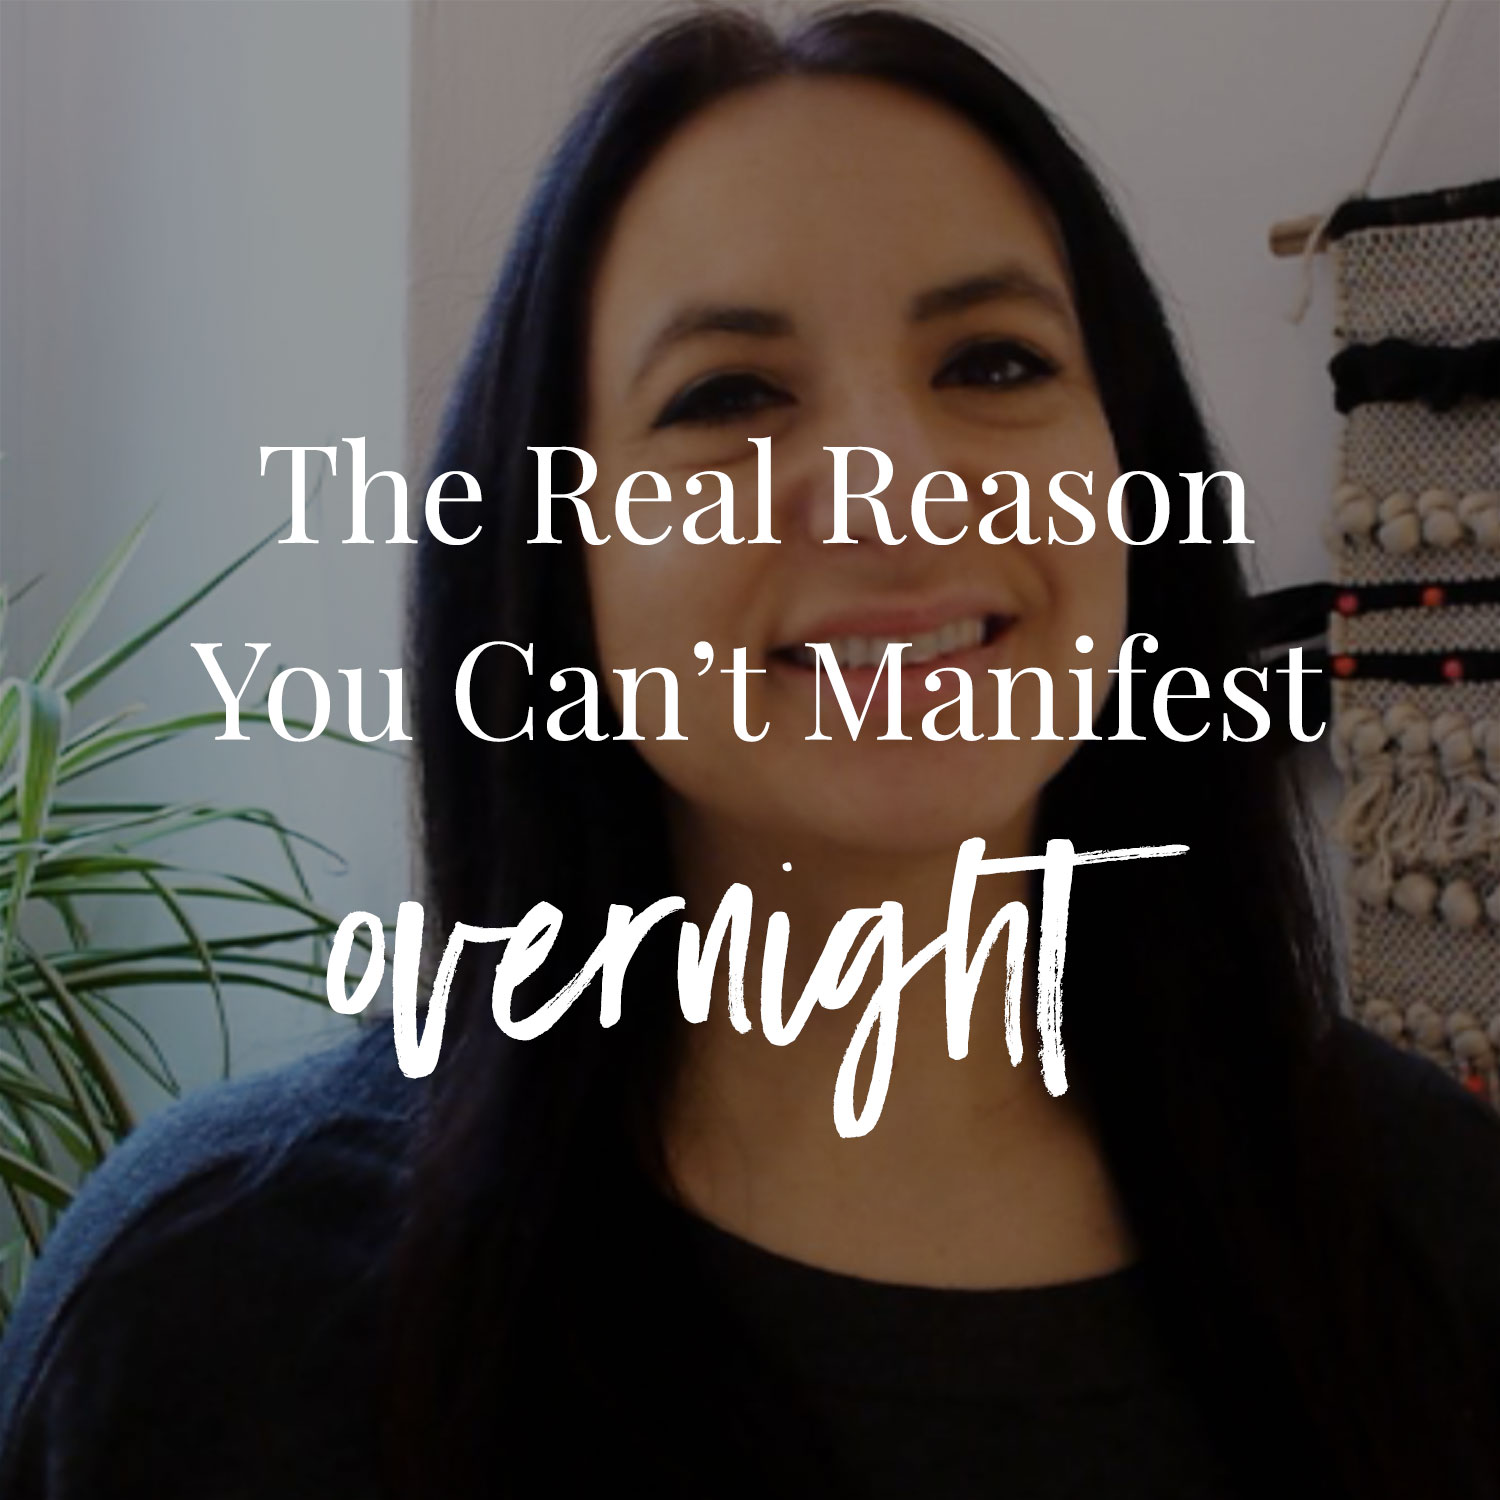 The Real Reason You Can't Manifest Overnight